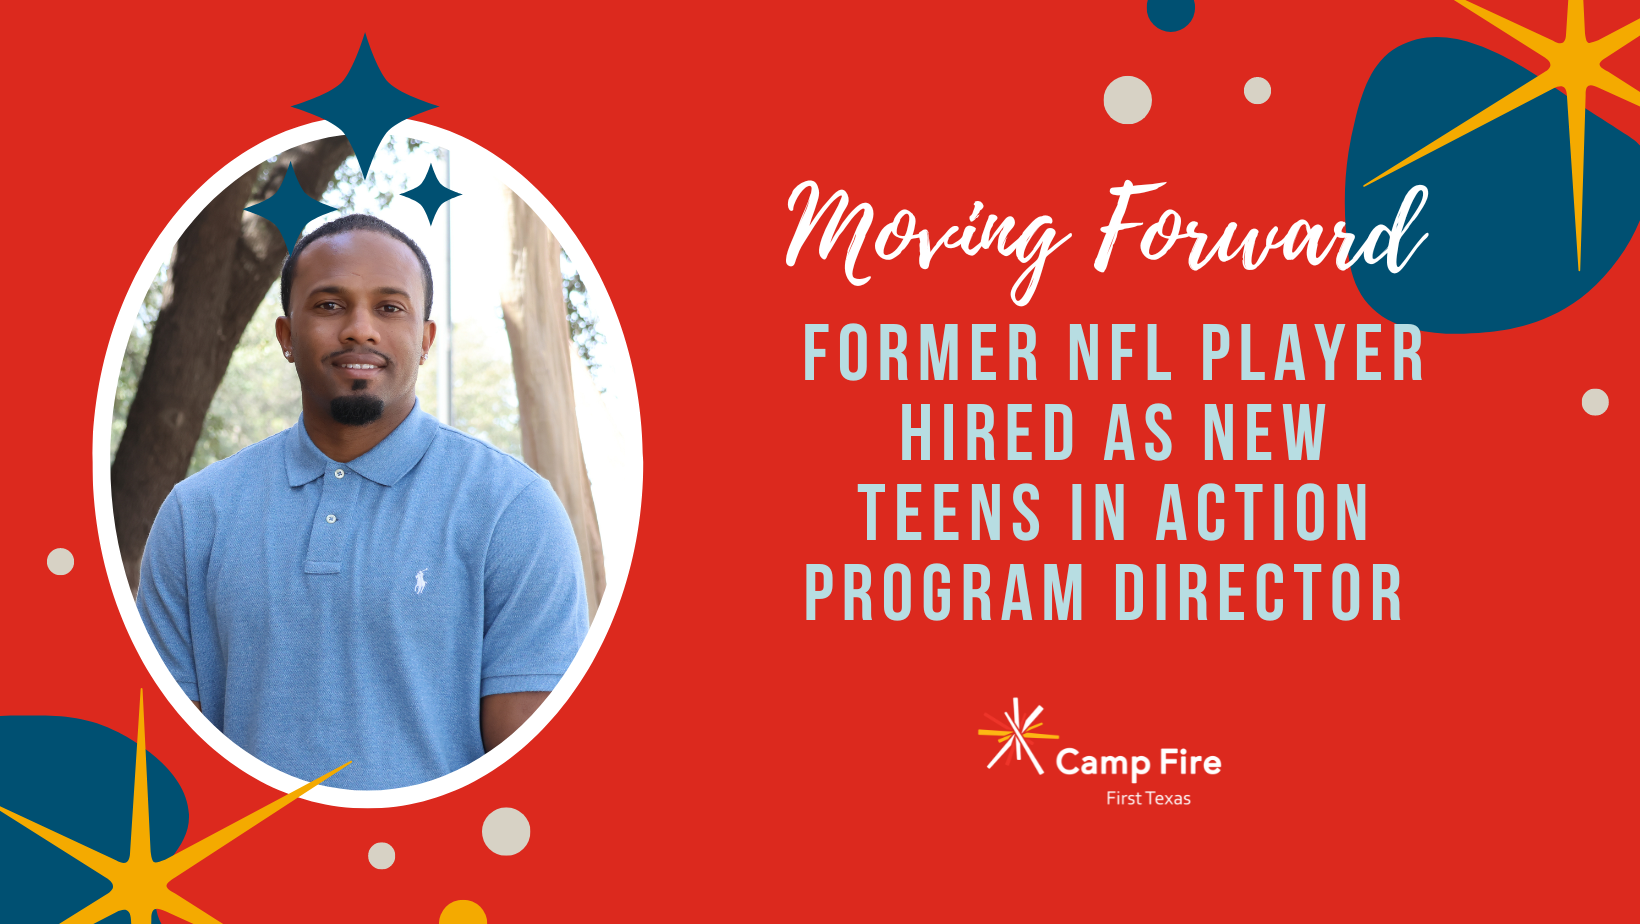 Camp Fire First Texas Hires Former NFL Player As New Program Director of Teens in Action, a Camp Fire First Texas blog